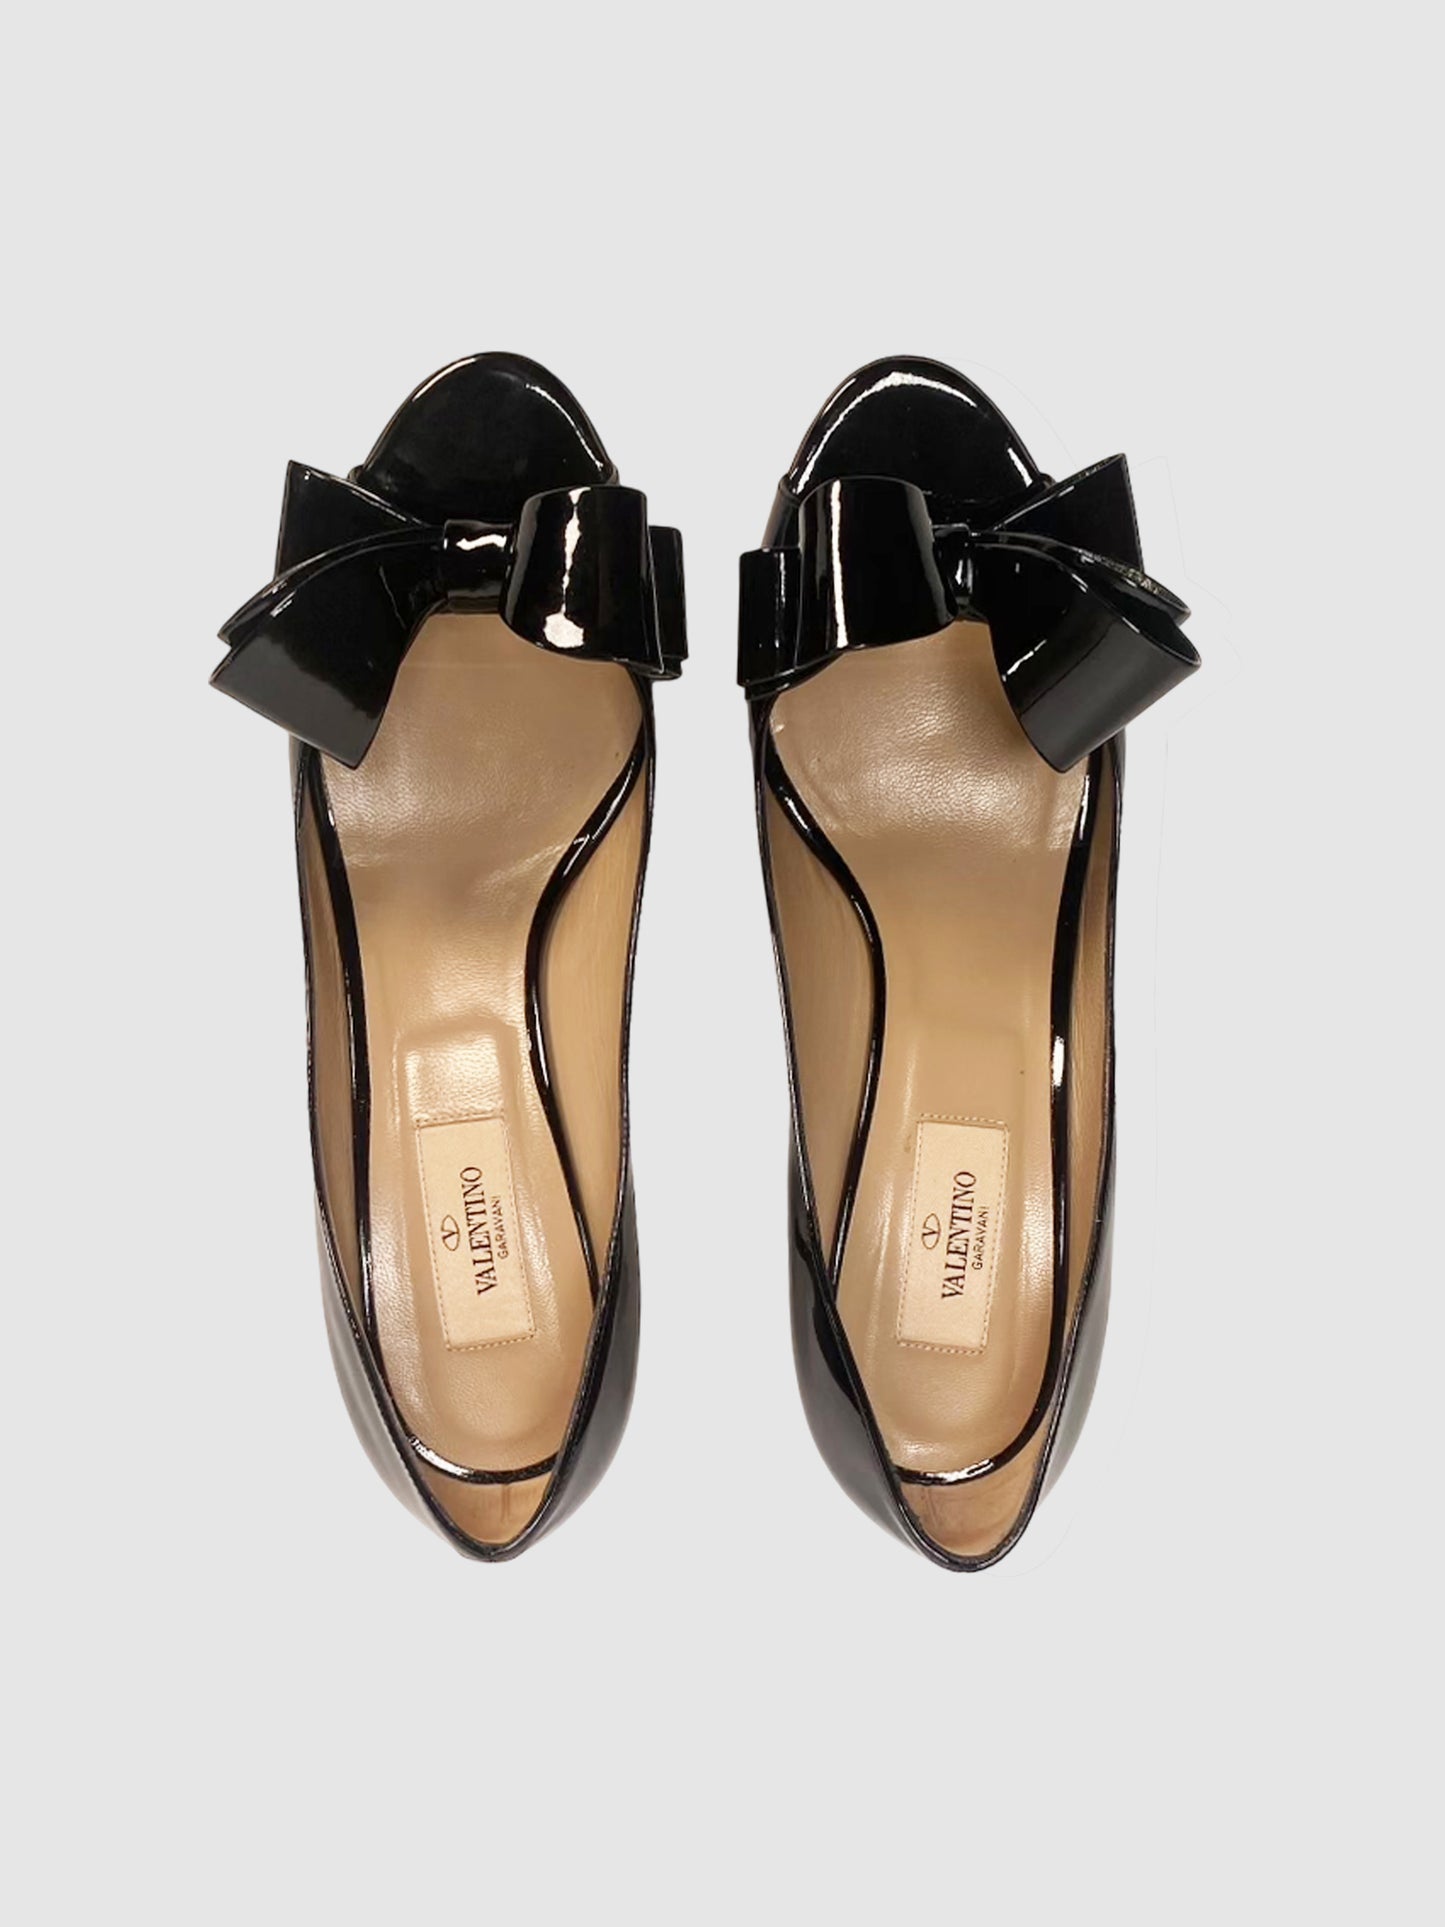 Valentino Patent Leather Bow Open Toe Pumps - Size 39